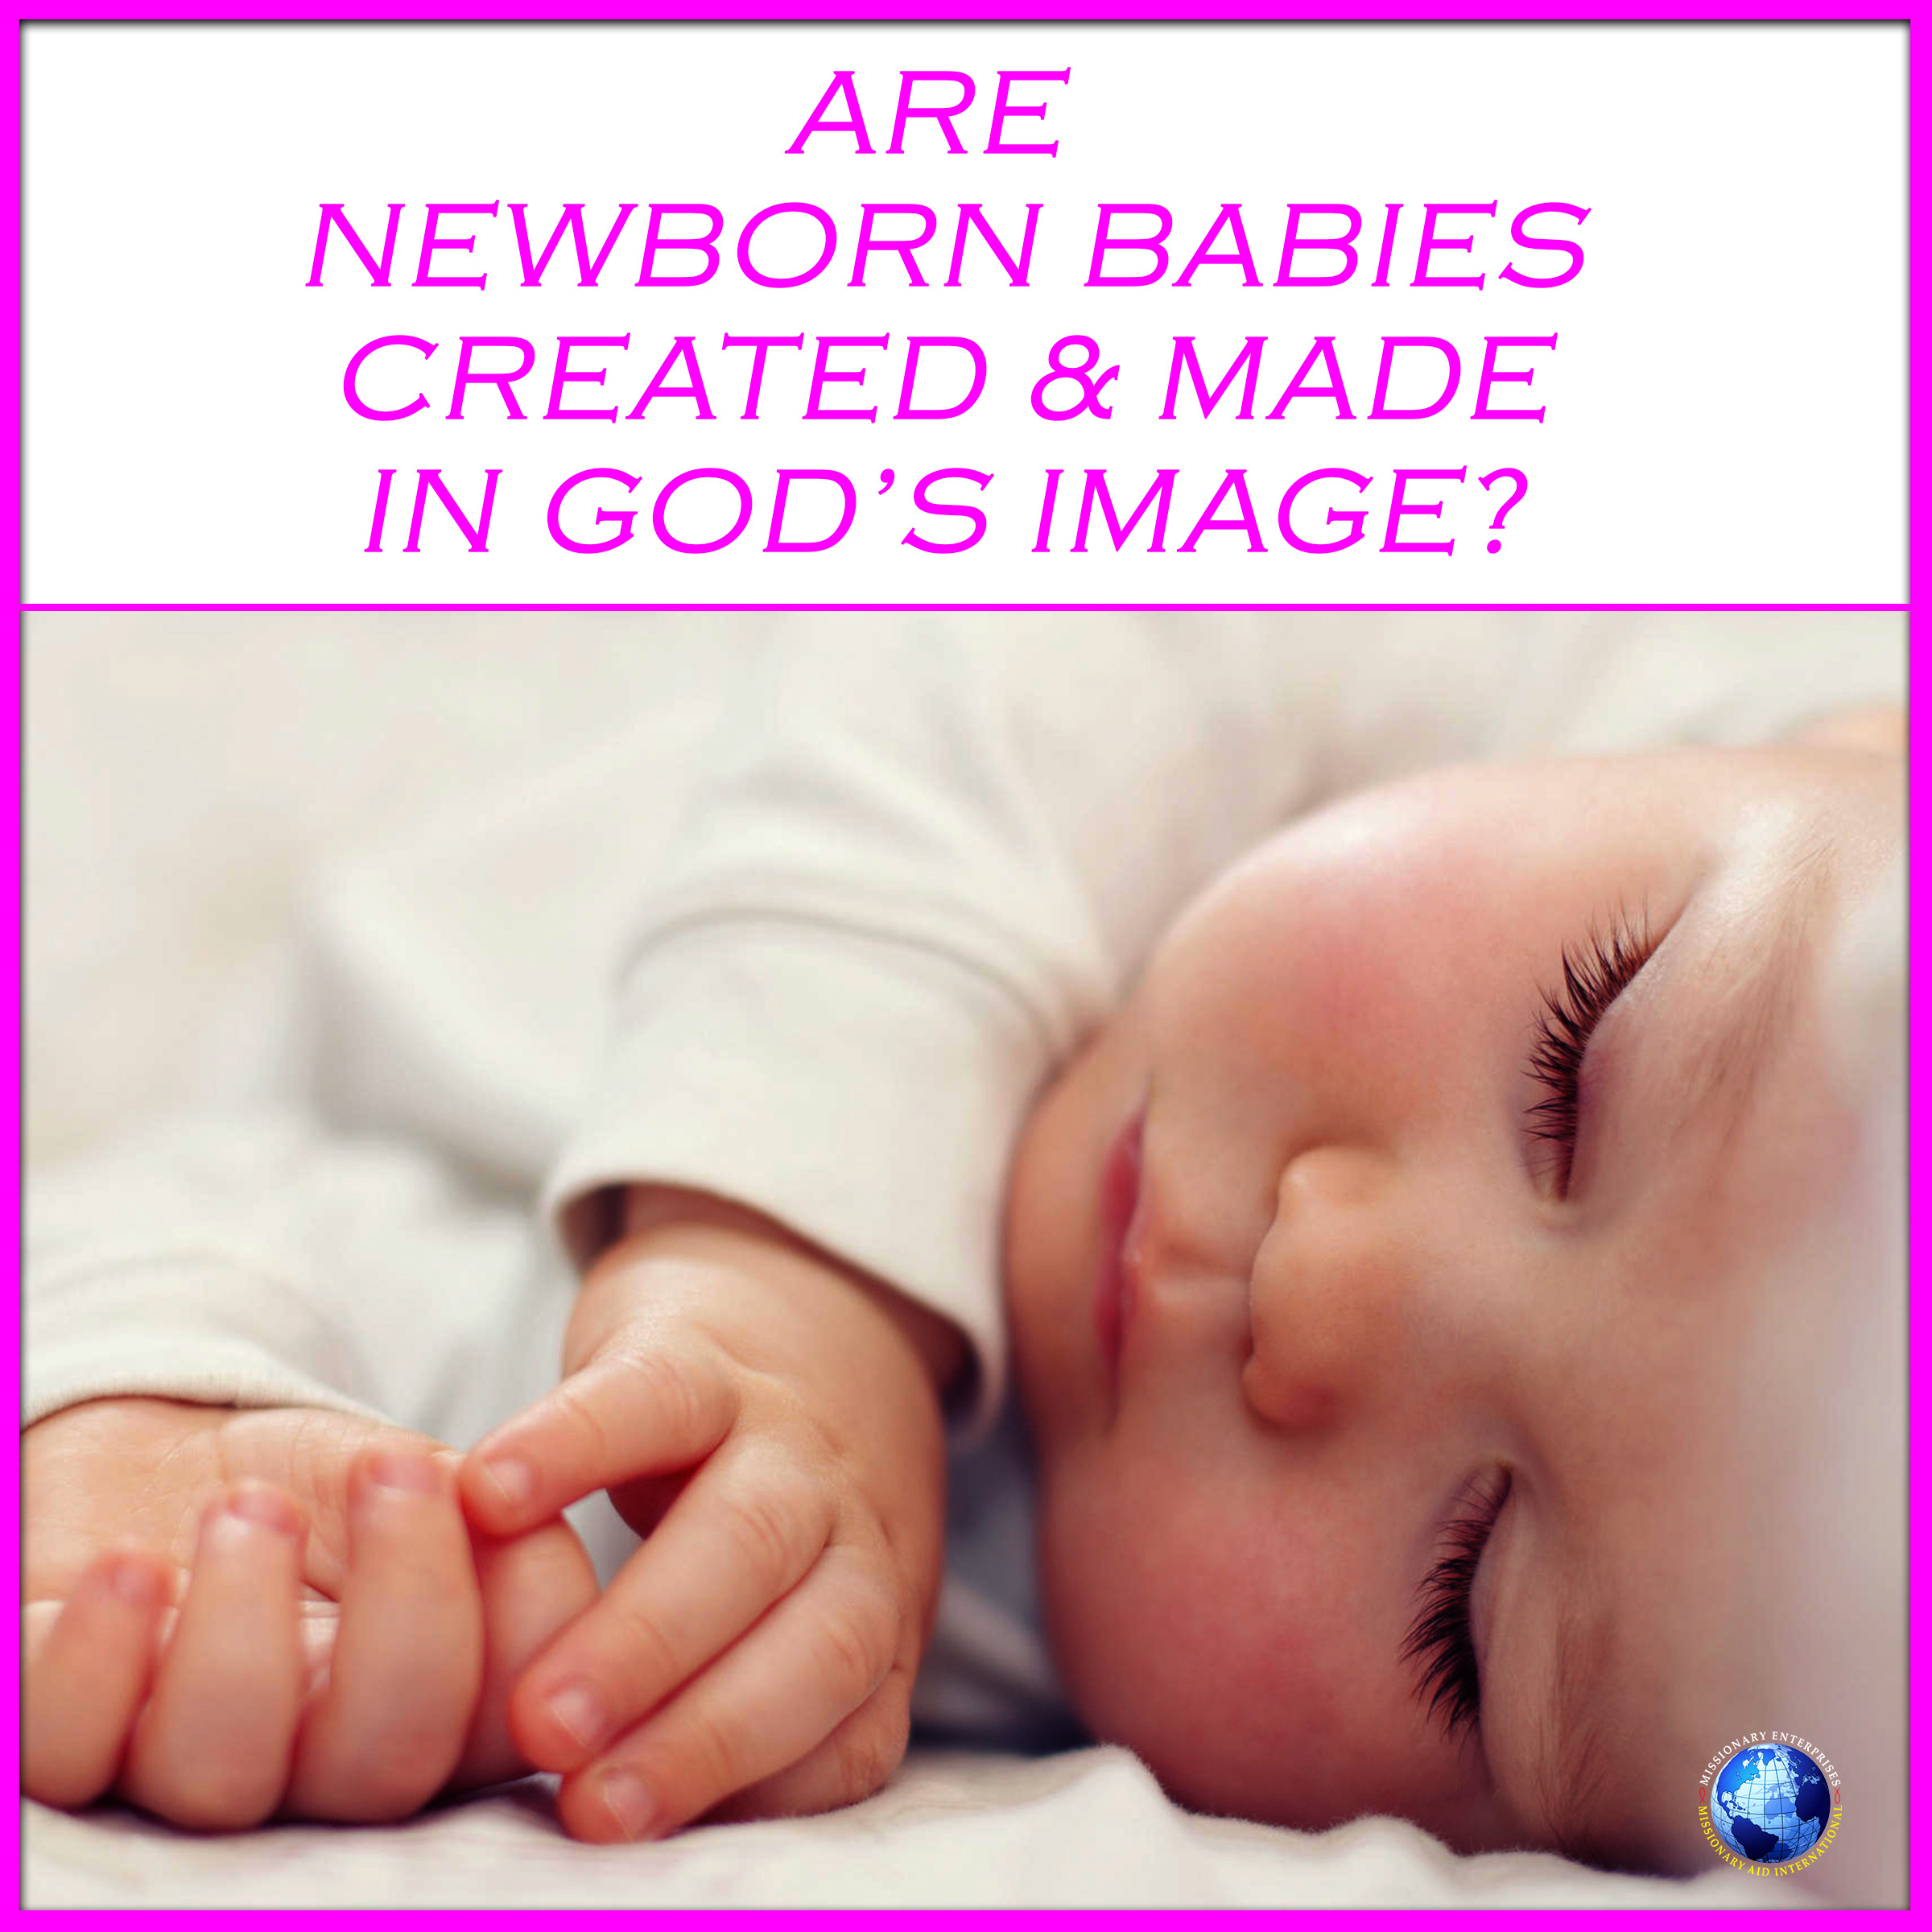 Are Newborn Babies Created & Made in God’s Image?